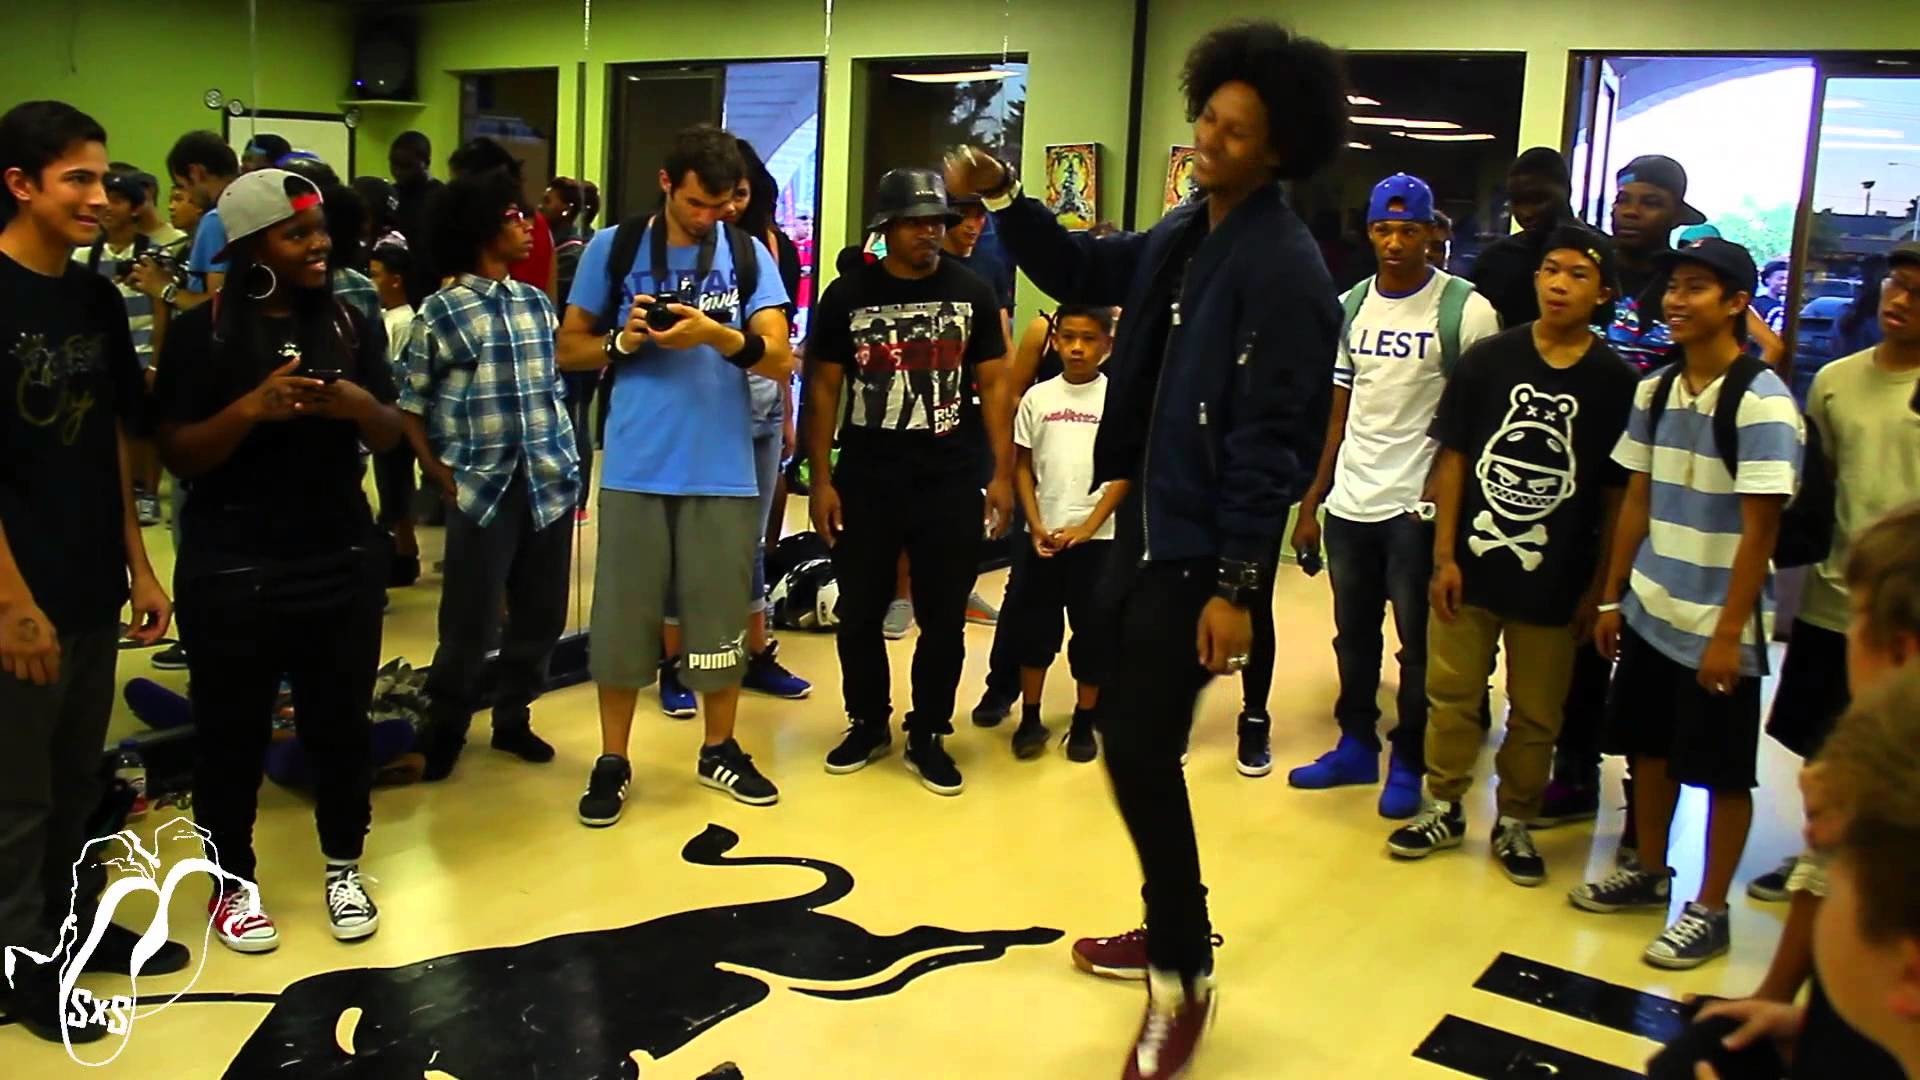 1920x1080 Les Twins, Kannon, and Kids | Cypher | Crackin Beats at DISTRCT | #SXSTV